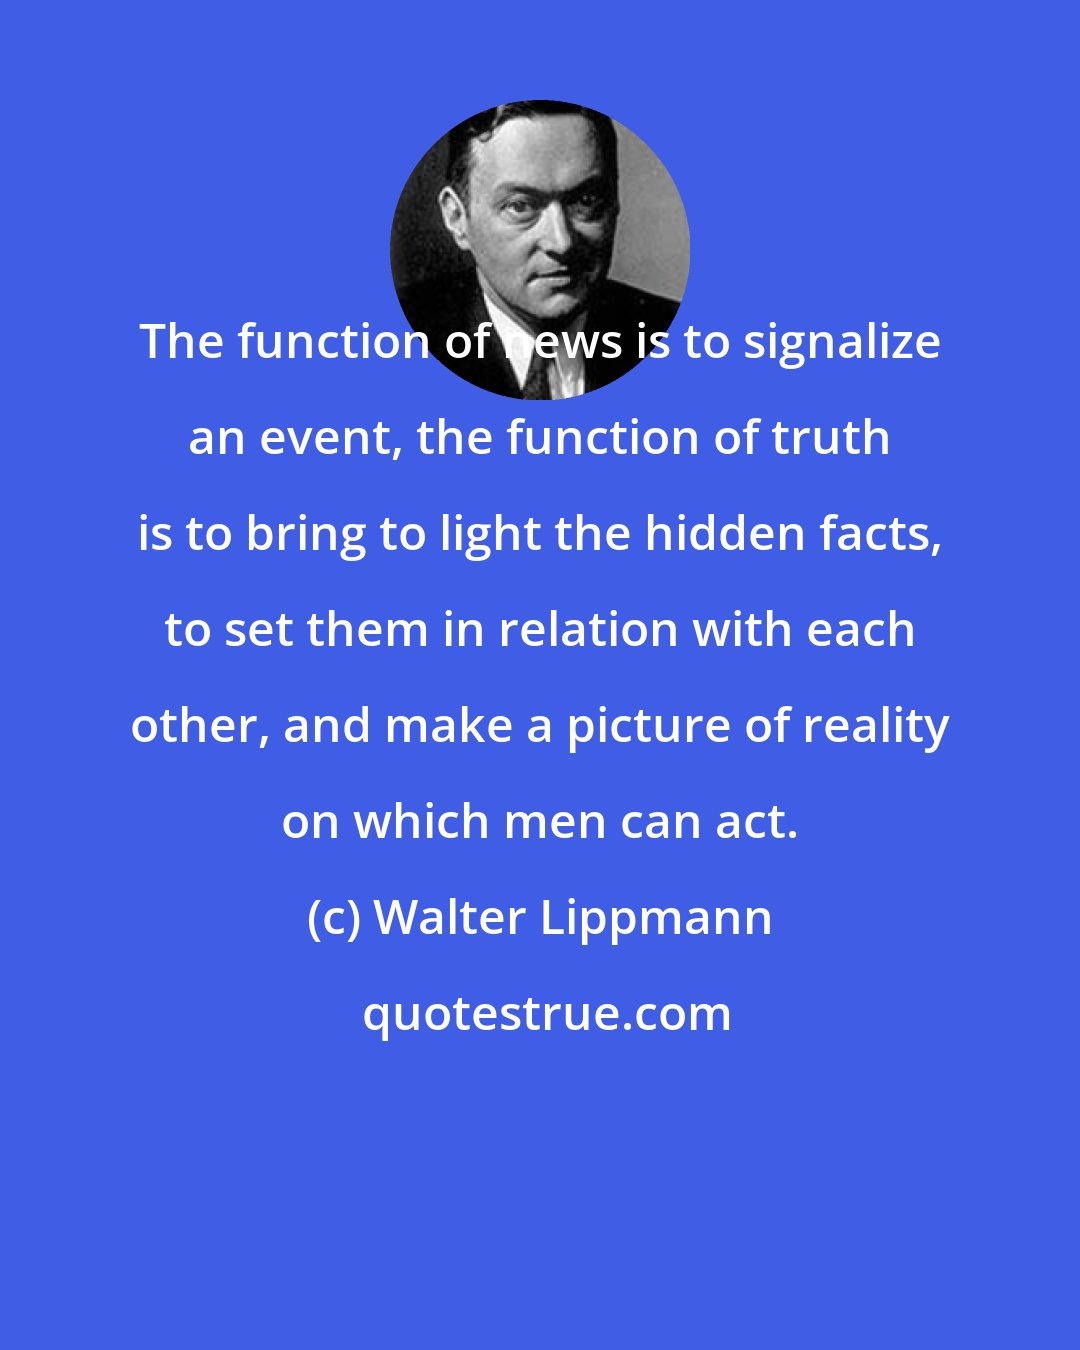 Walter Lippmann: The function of news is to signalize an event, the function of truth is to bring to light the hidden facts, to set them in relation with each other, and make a picture of reality on which men can act.